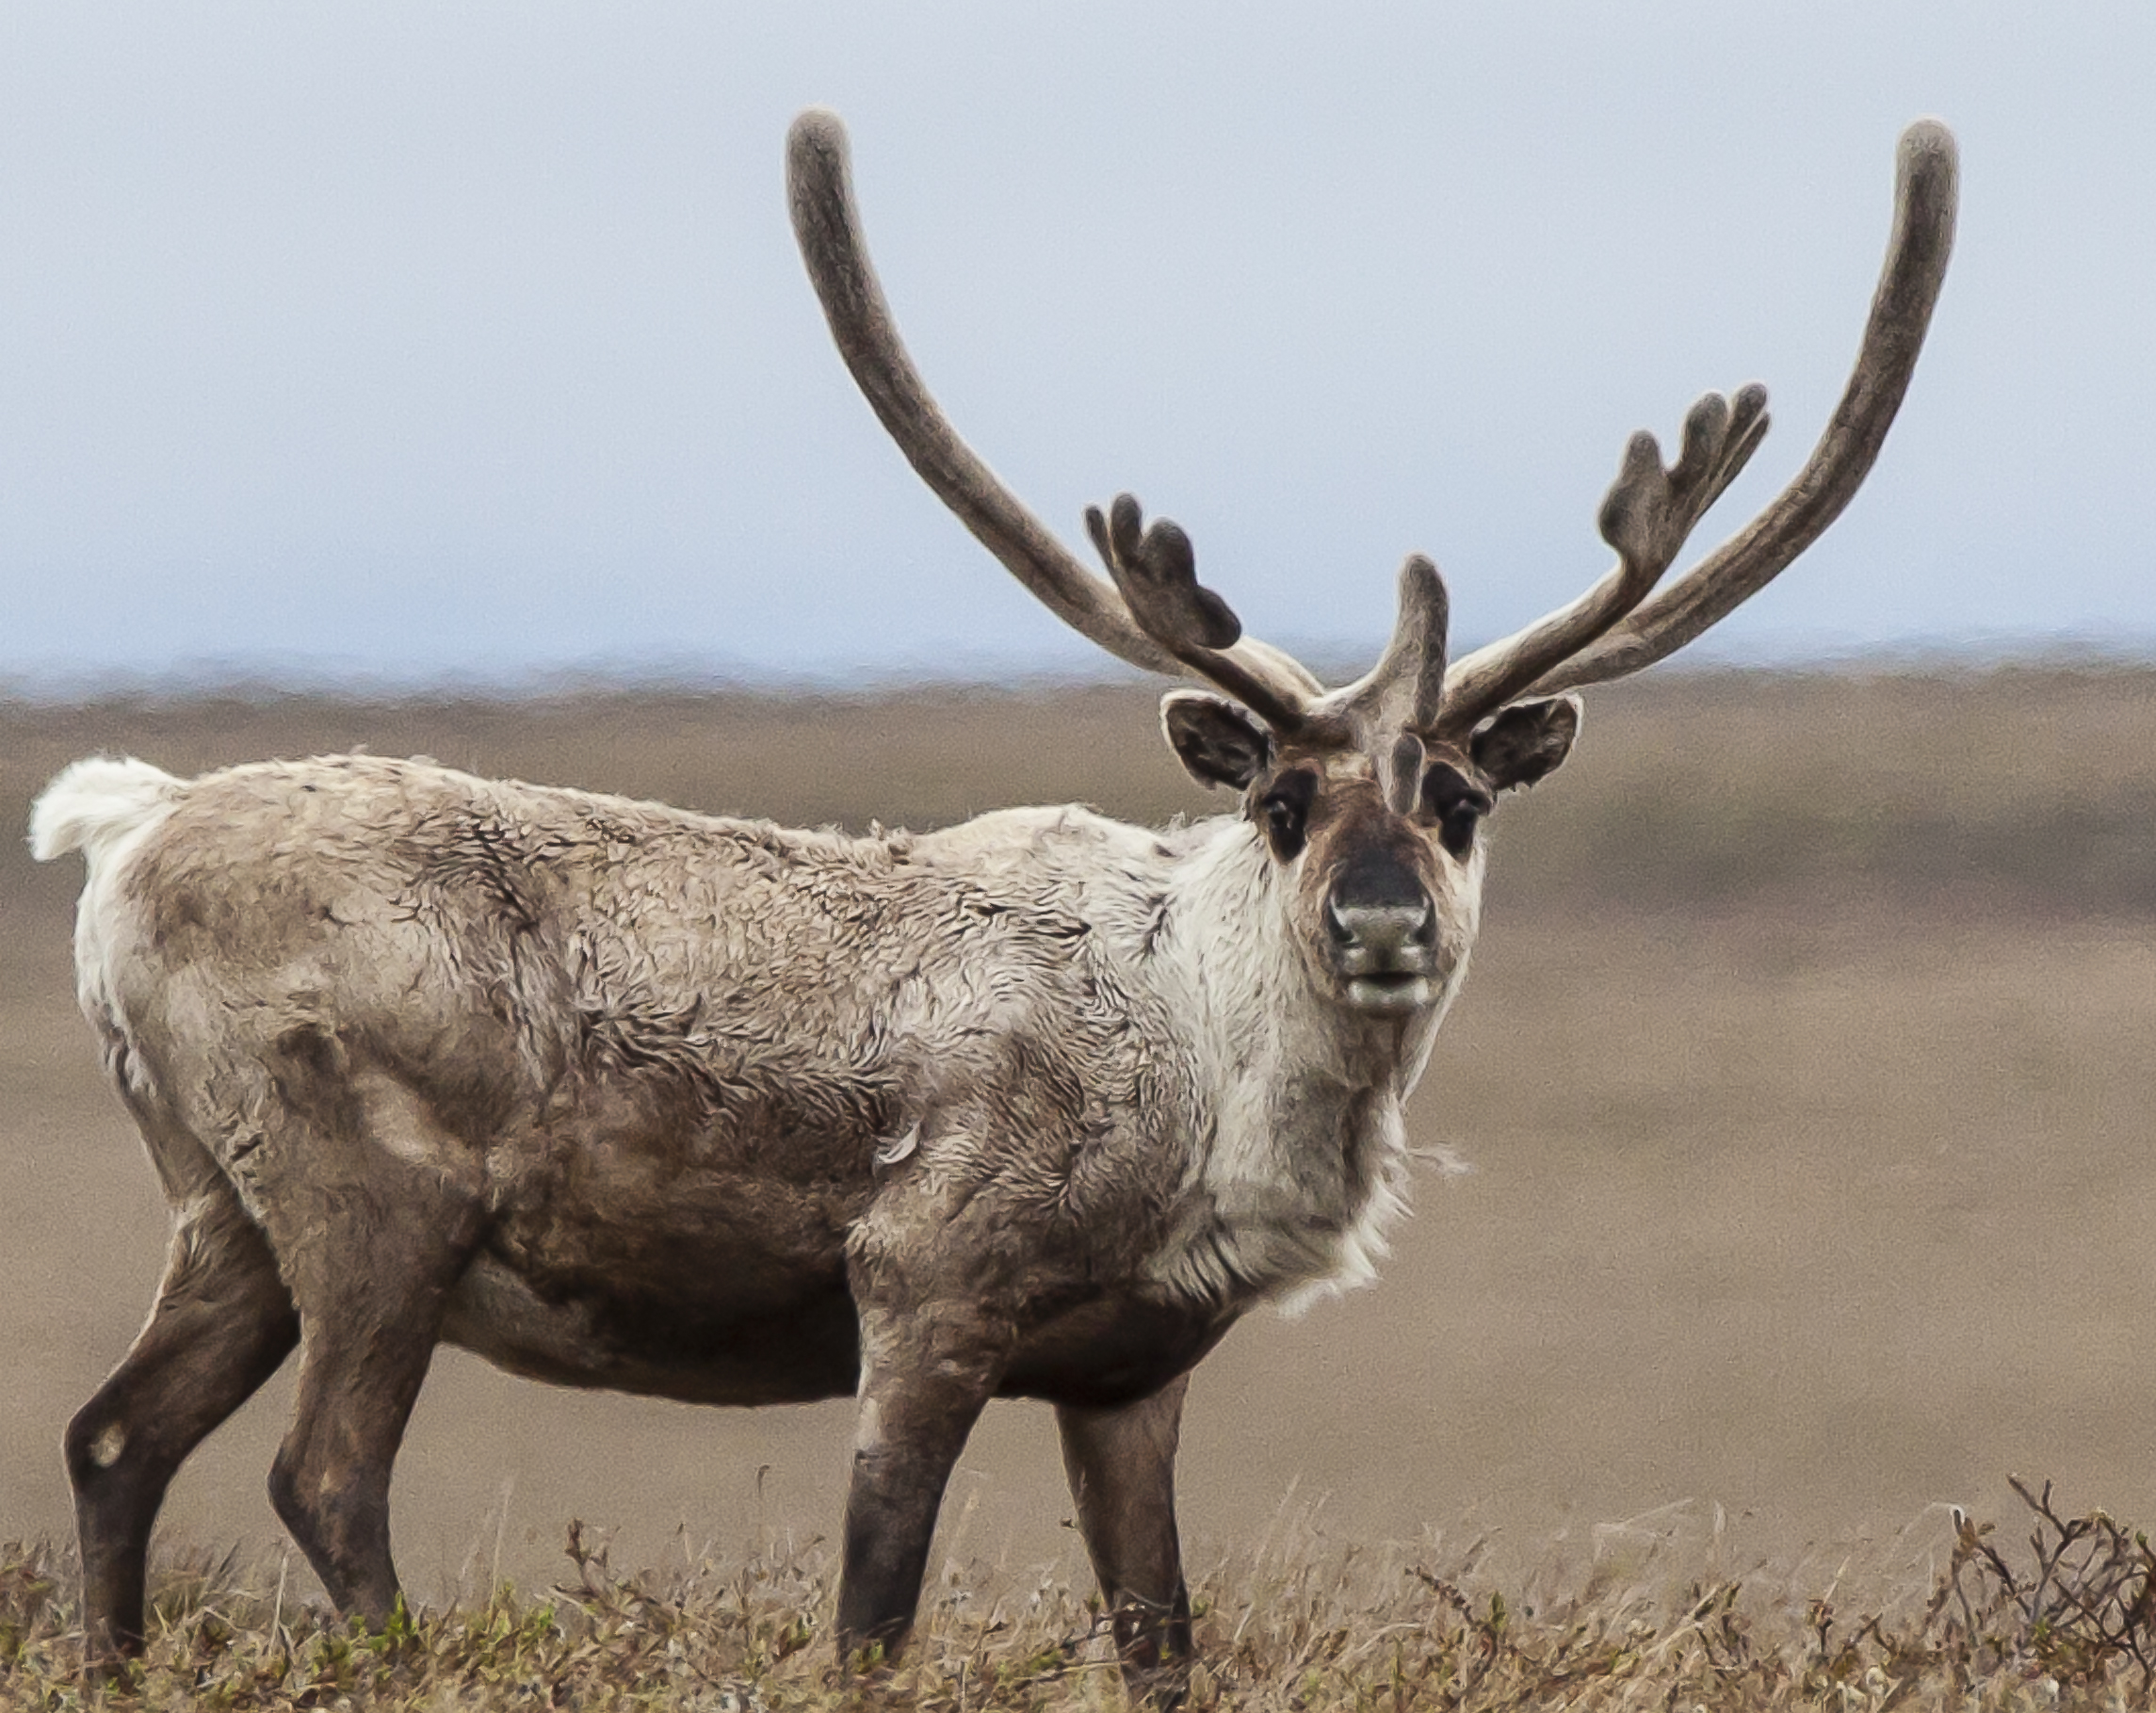 The Teshekpuk caribou herd’s key calving ground is in the Teshekpuk Lake Special Area, one of the many critical habitat areas that will lose protection under the new plan.